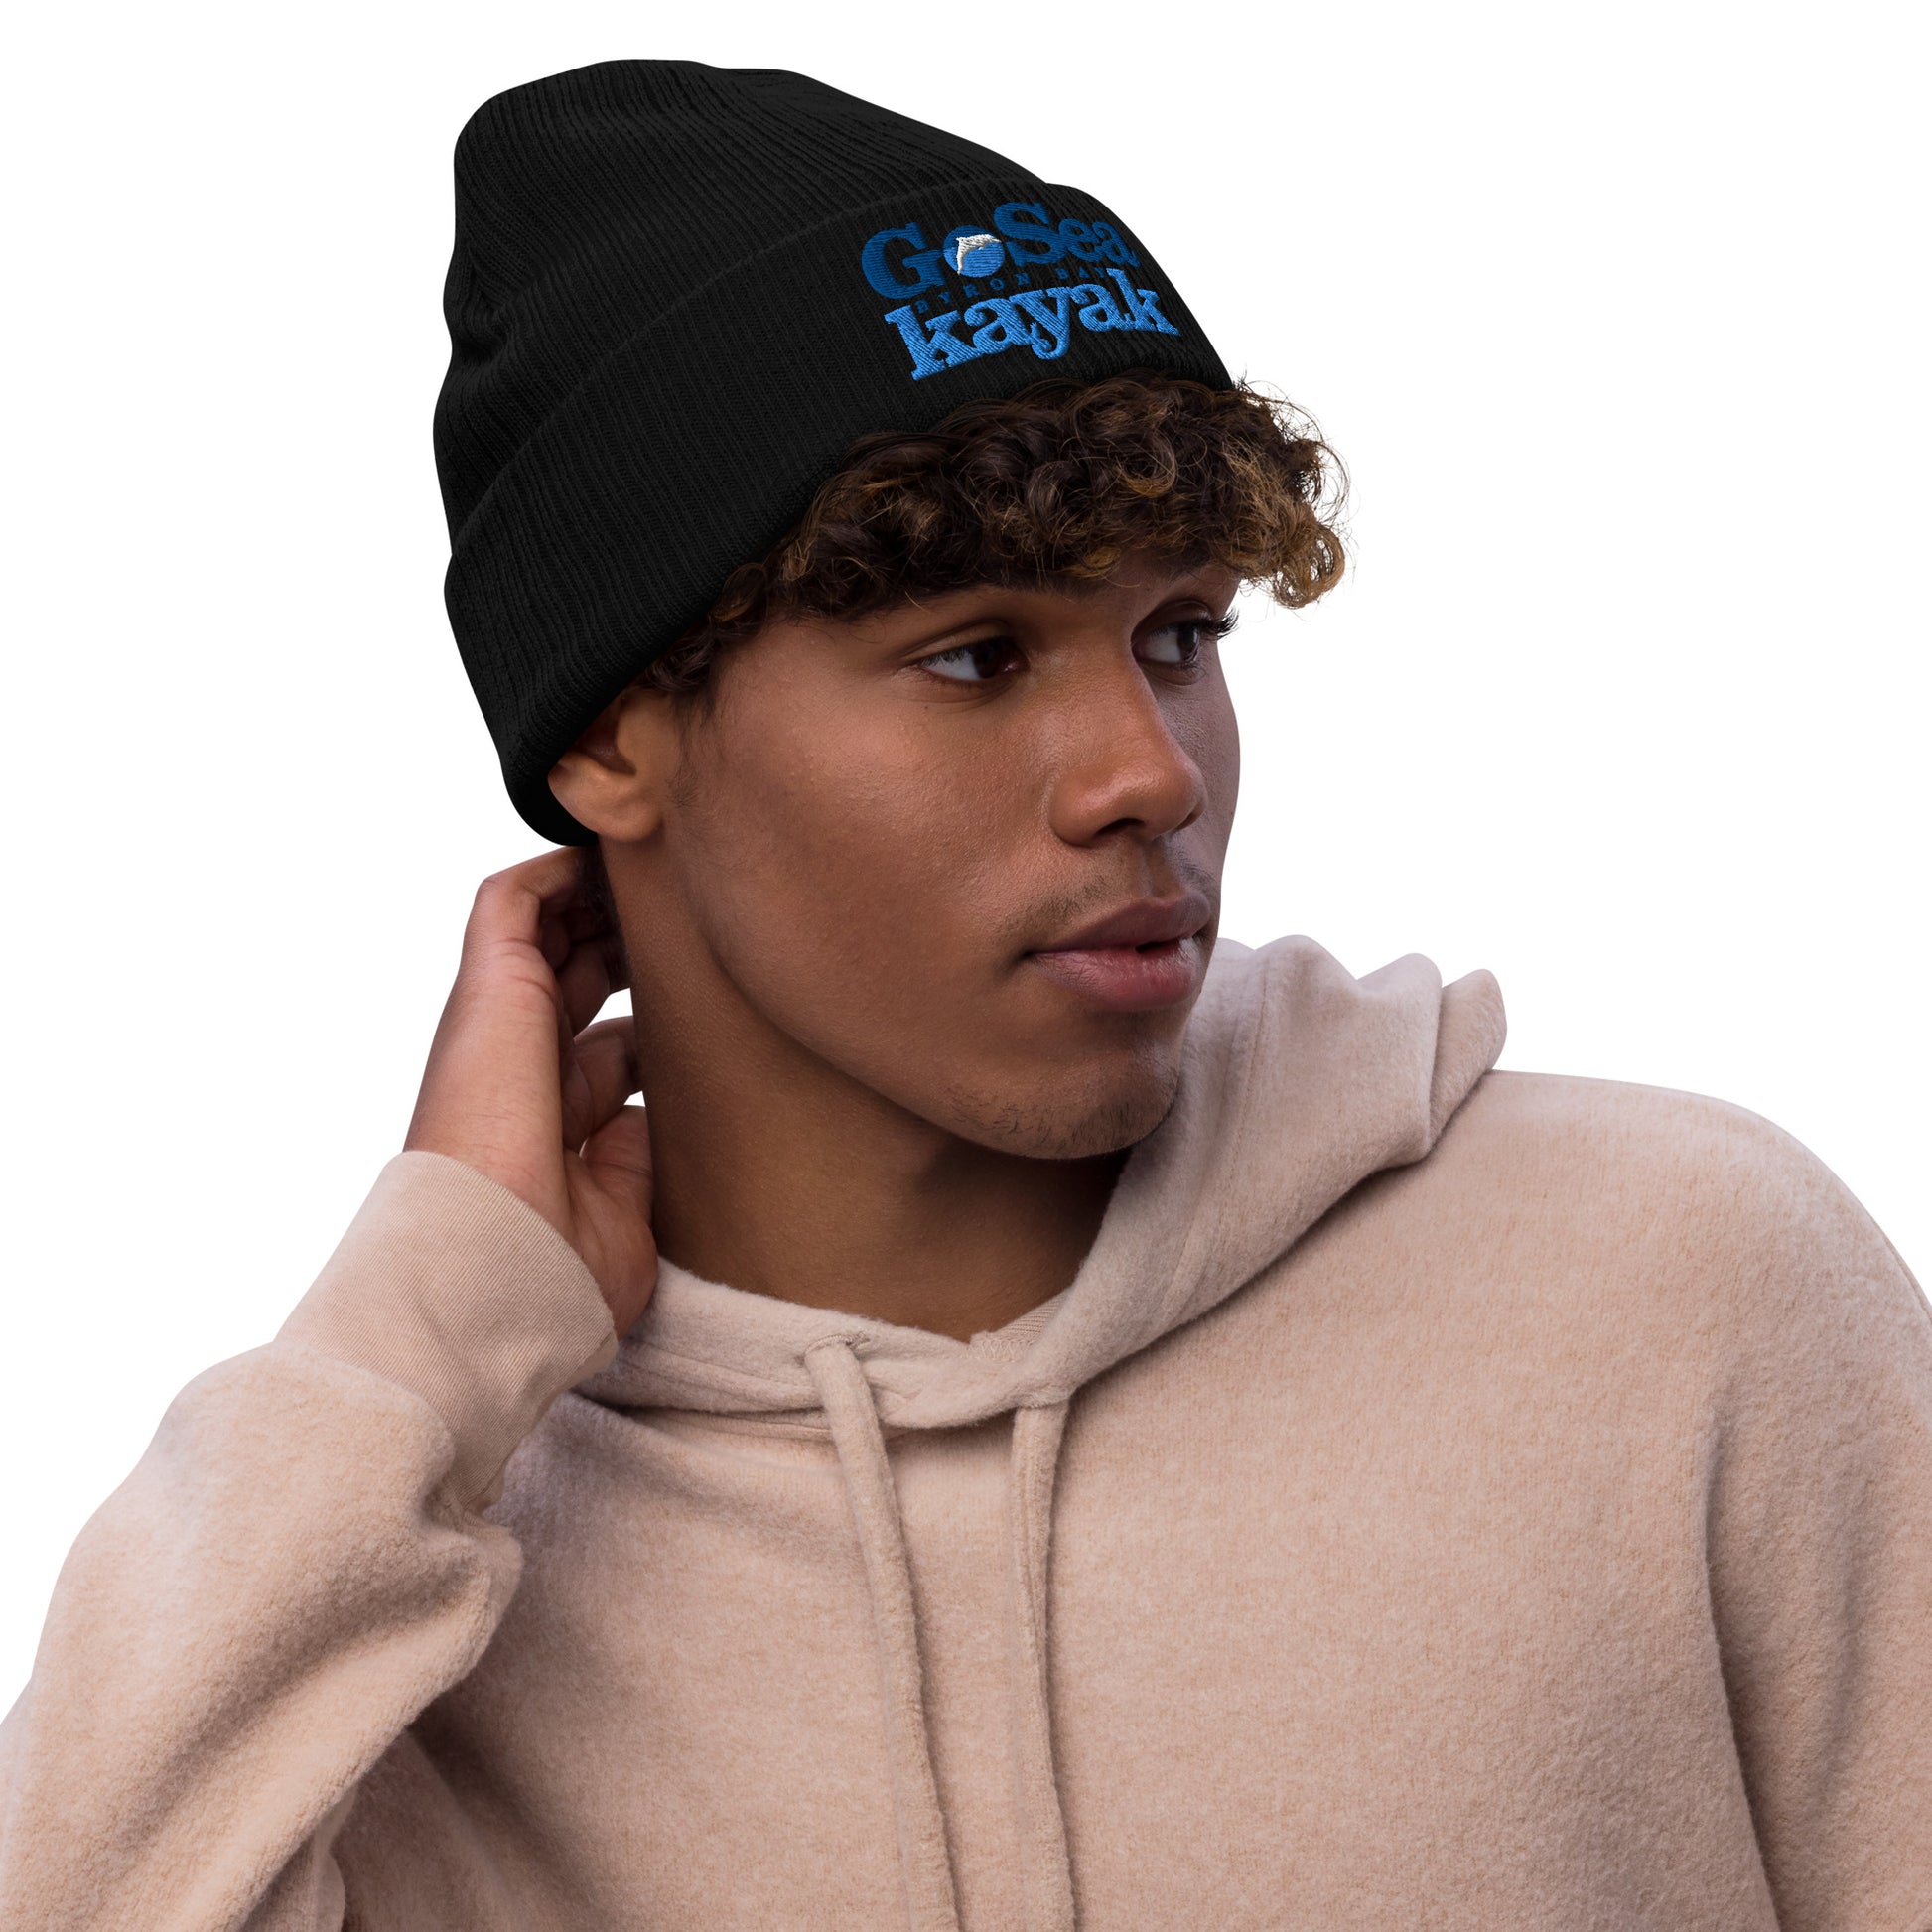  Ribbed Knit Beanie - Recycled polyester - Black  - Being warn on man's head - Go Sea Kayak Byron Bay logo on front - Genuine Byron Bay Merchandise | Produced by Go Sea Kayak Byron Bay 